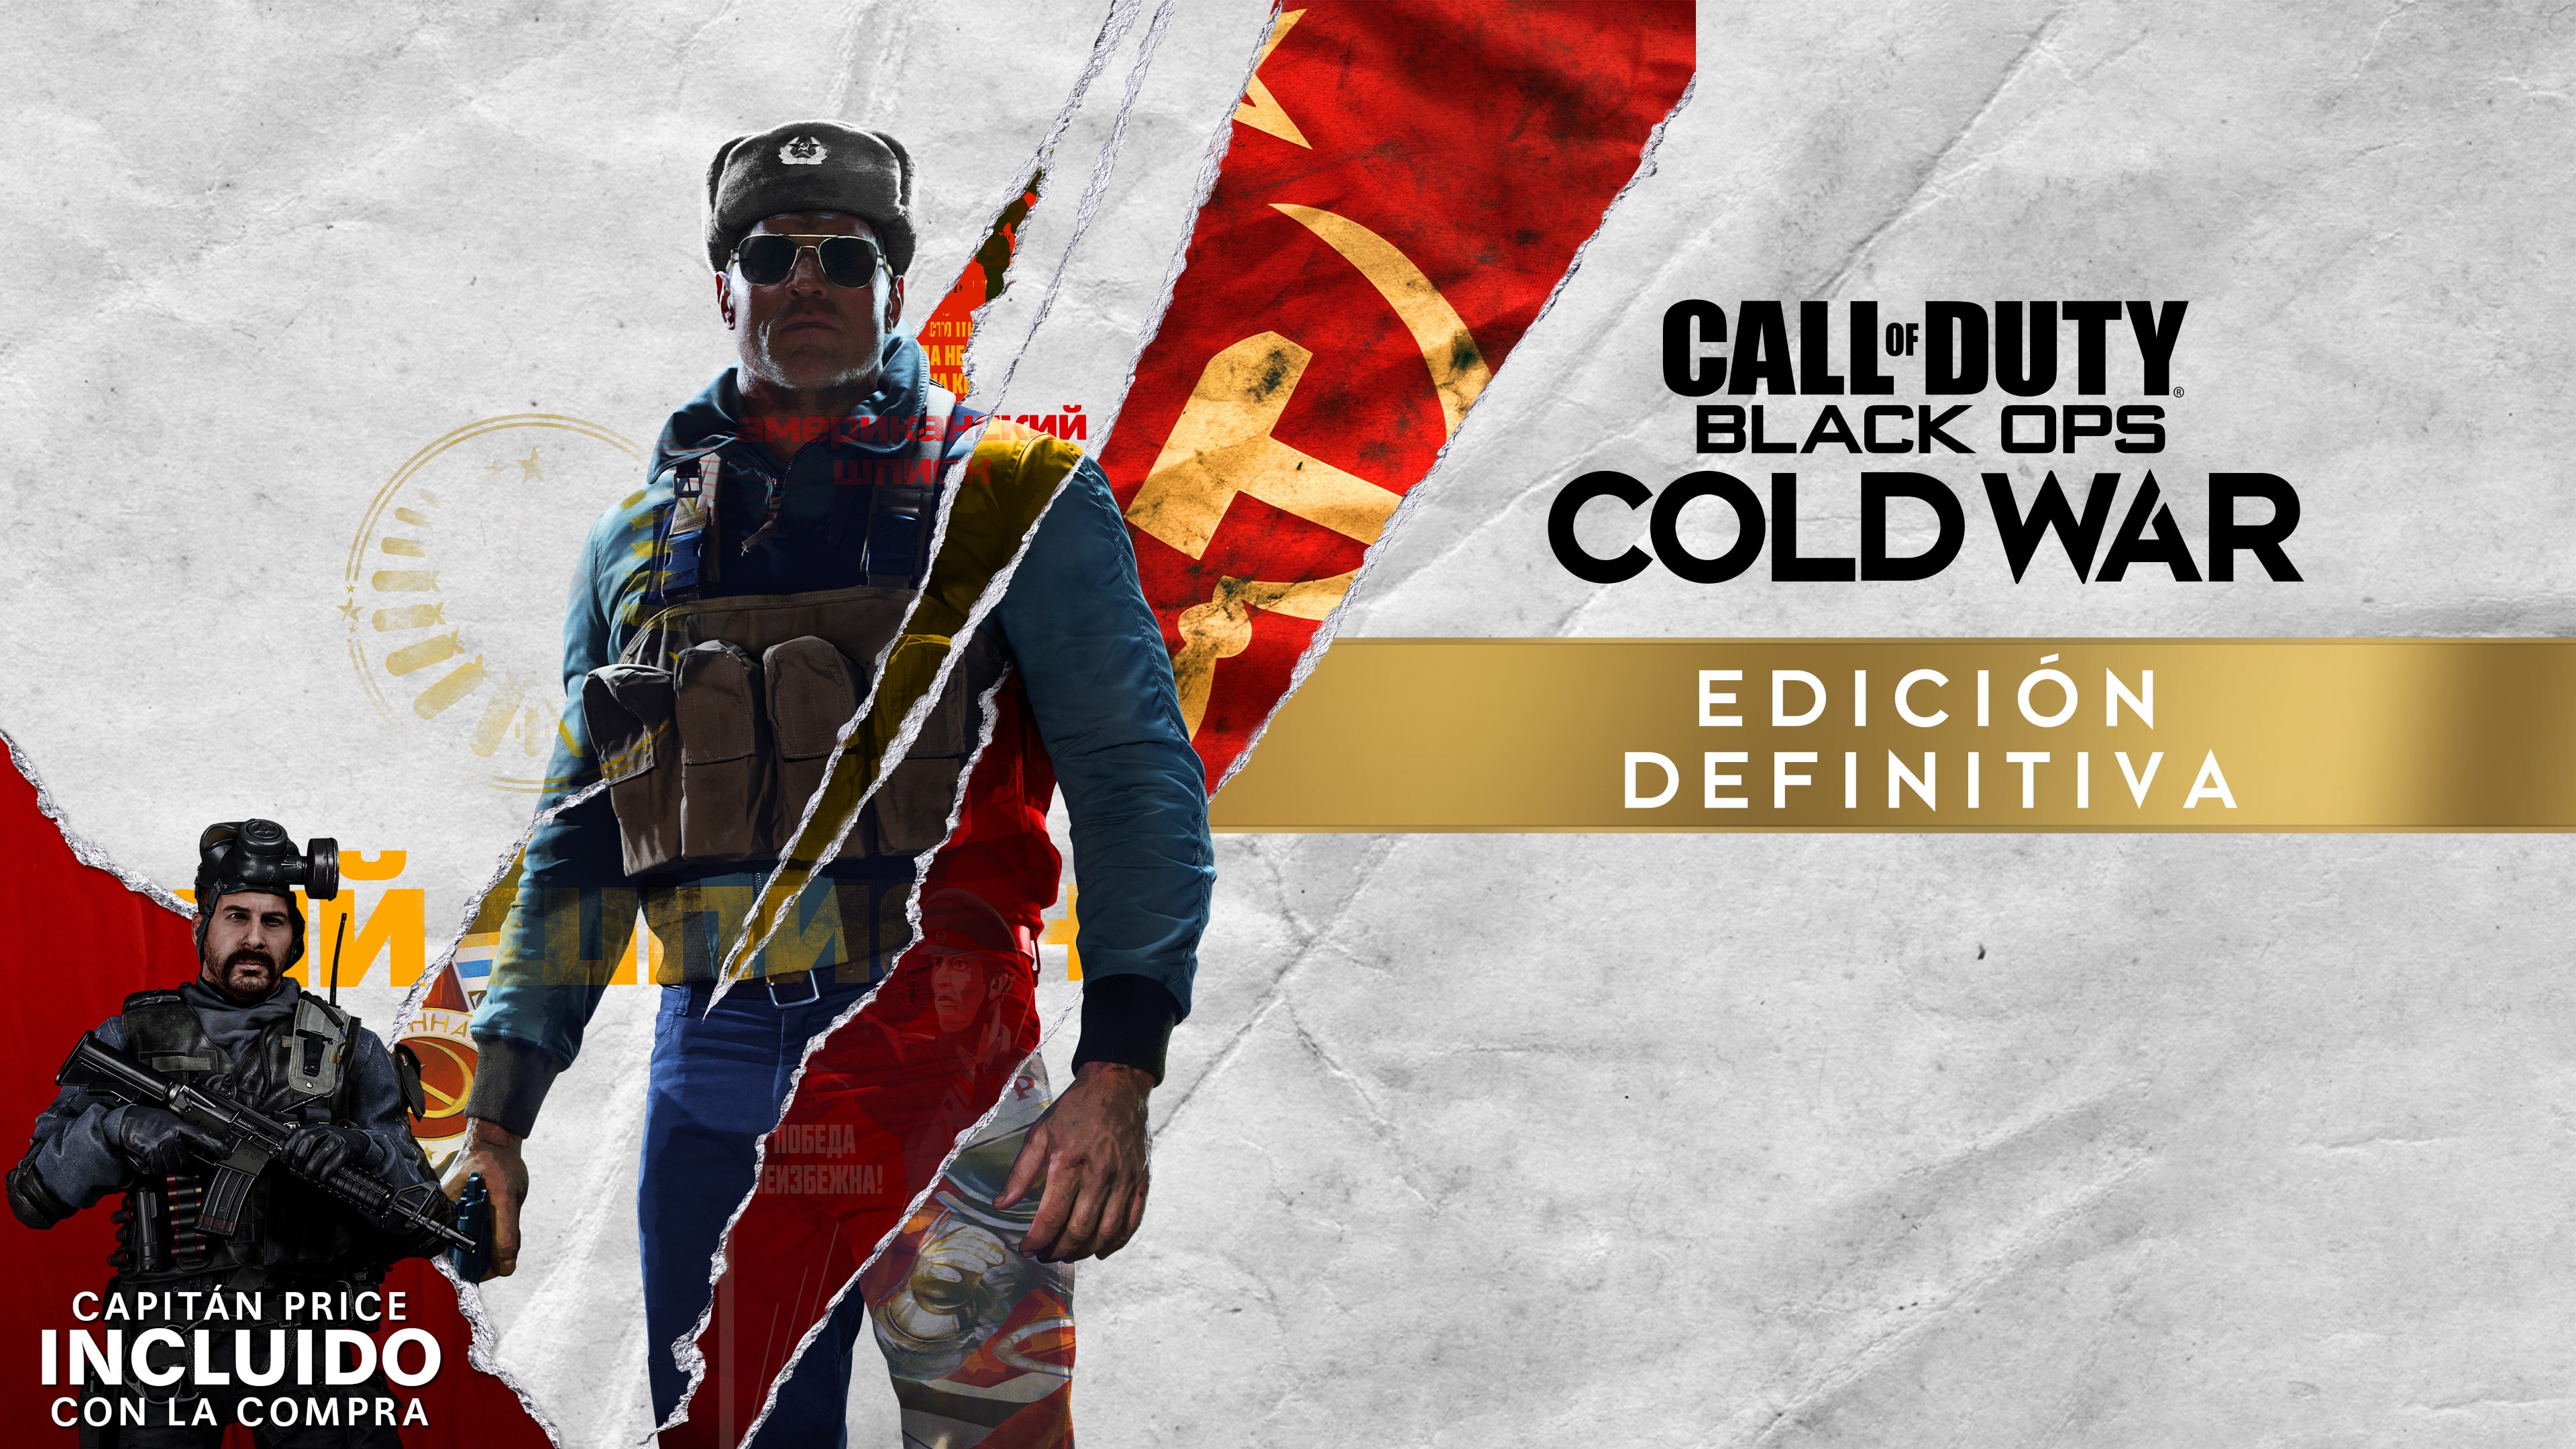 call of duty cold war ps4 digital download